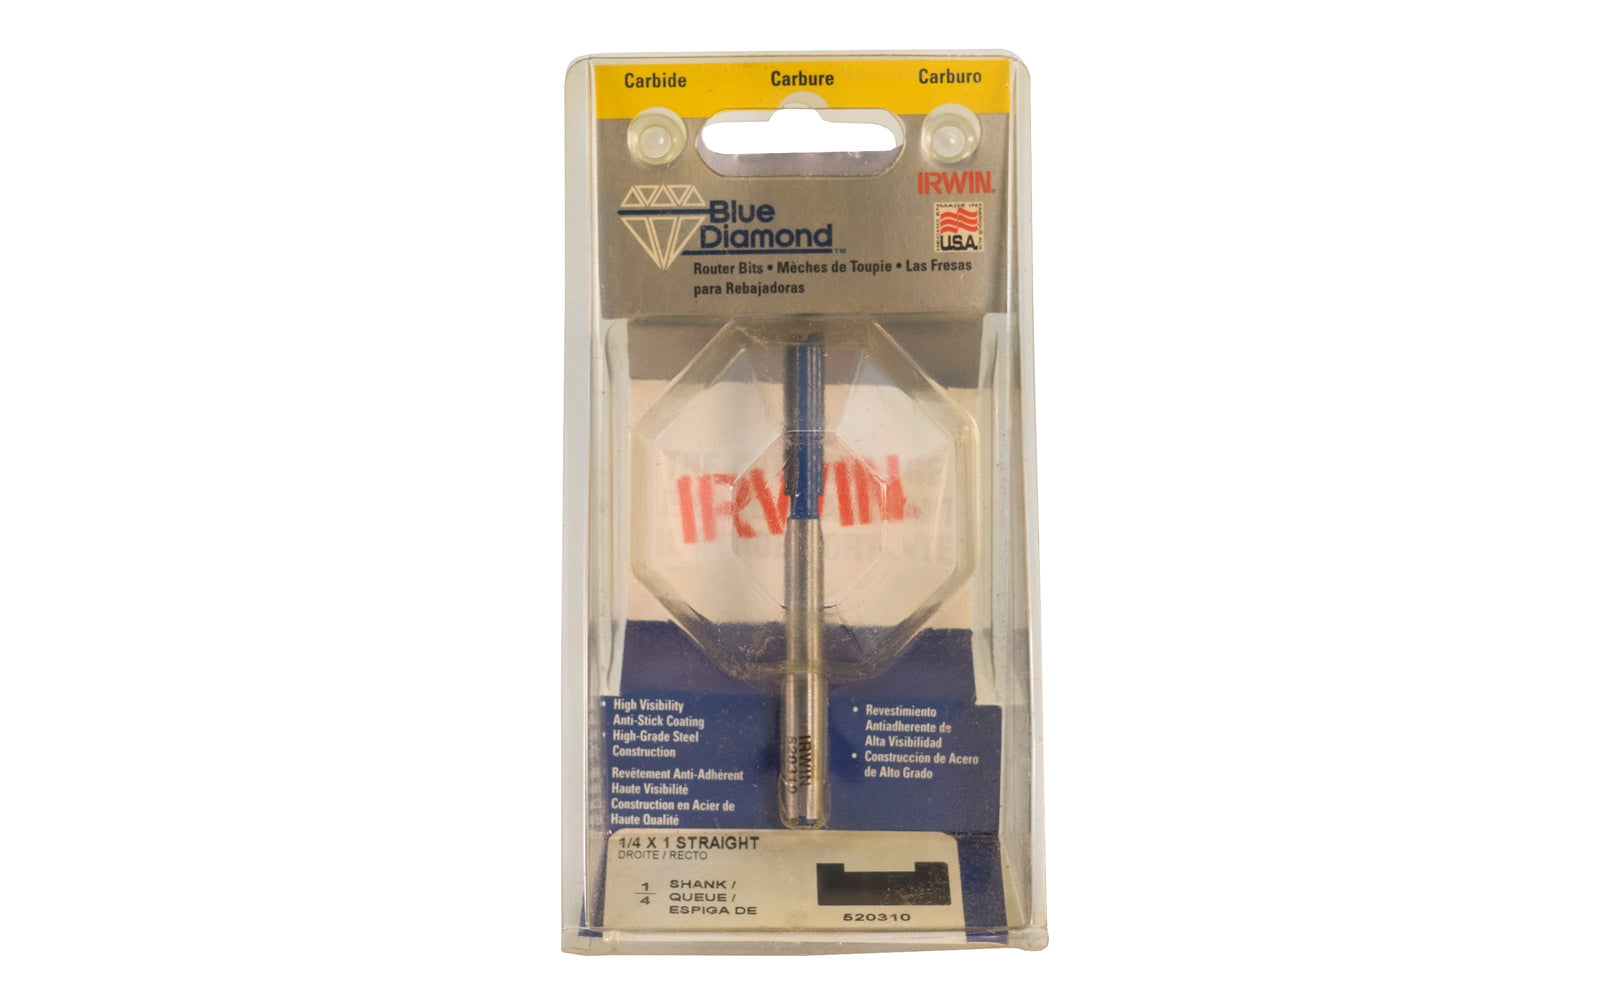 Irwin Carbide 1/4" x 1" Straight Router Bit - Made in USA. Carbide - High Grade Steel construction Router Bit. 1" depth. 3" overall length. 1/4" shank. Irwin Blue Diamond Model No. 520310. Made in USA.